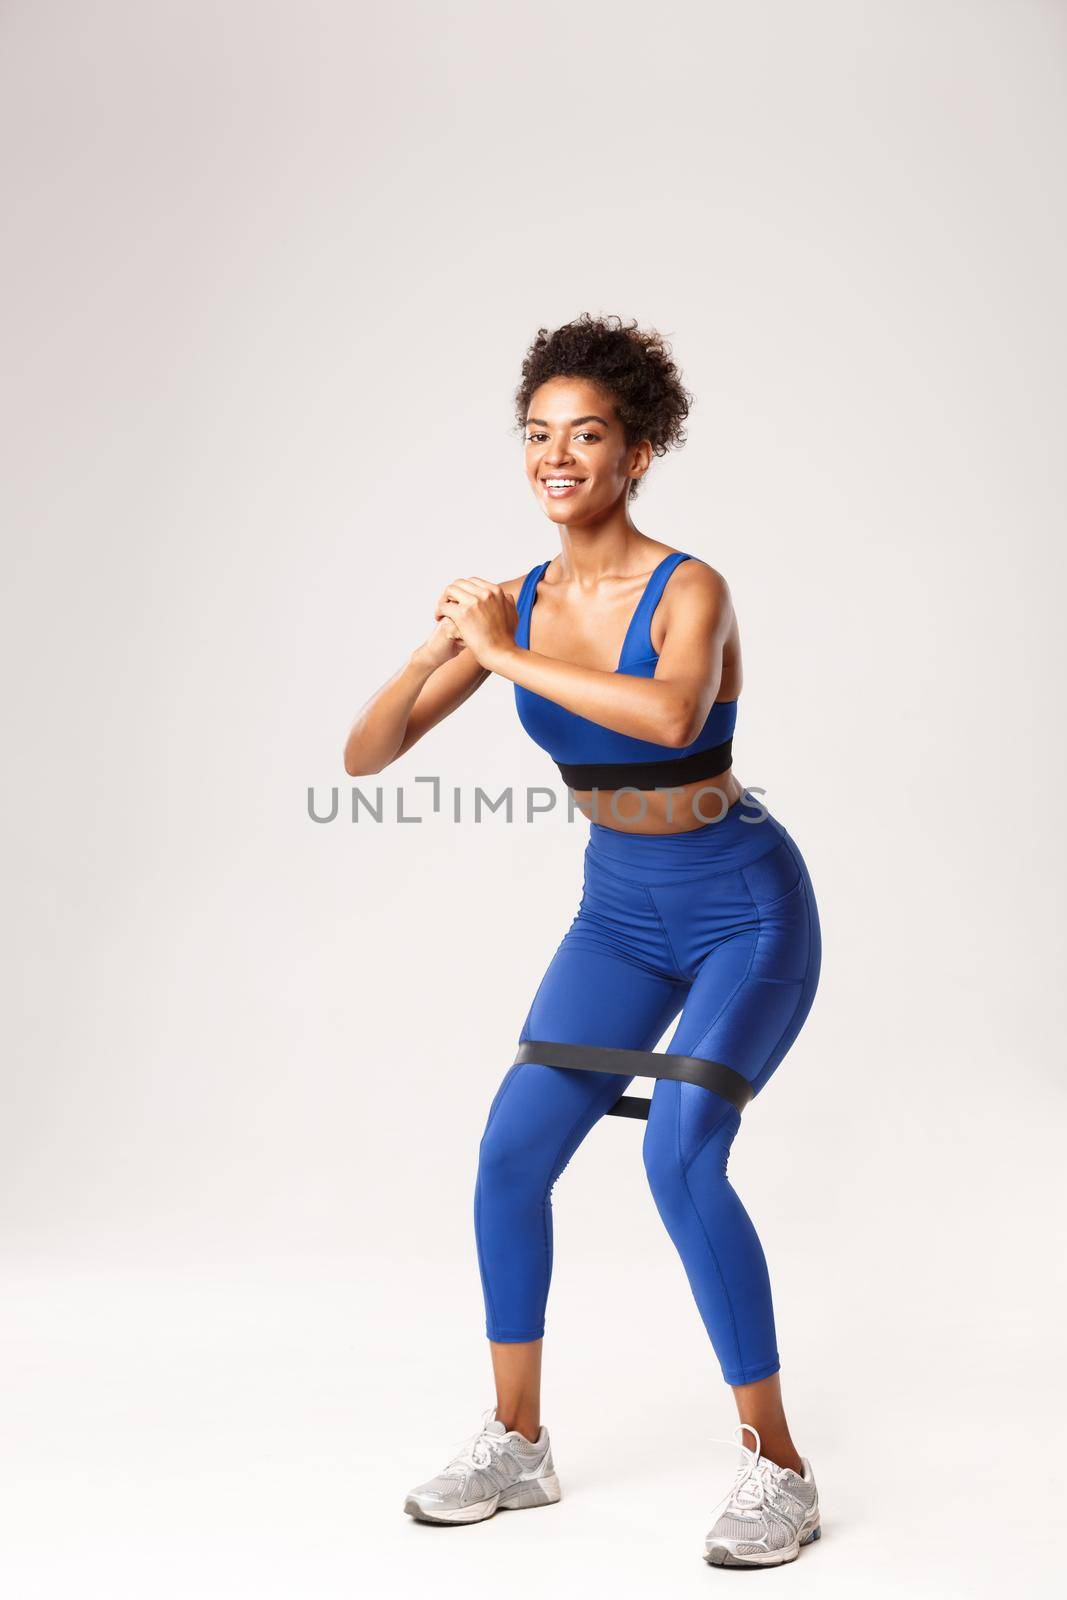 Full length of smiling fit woman enjoying fitness, wearing blue sport outfit, doing squats with resistance band, standing against white background.